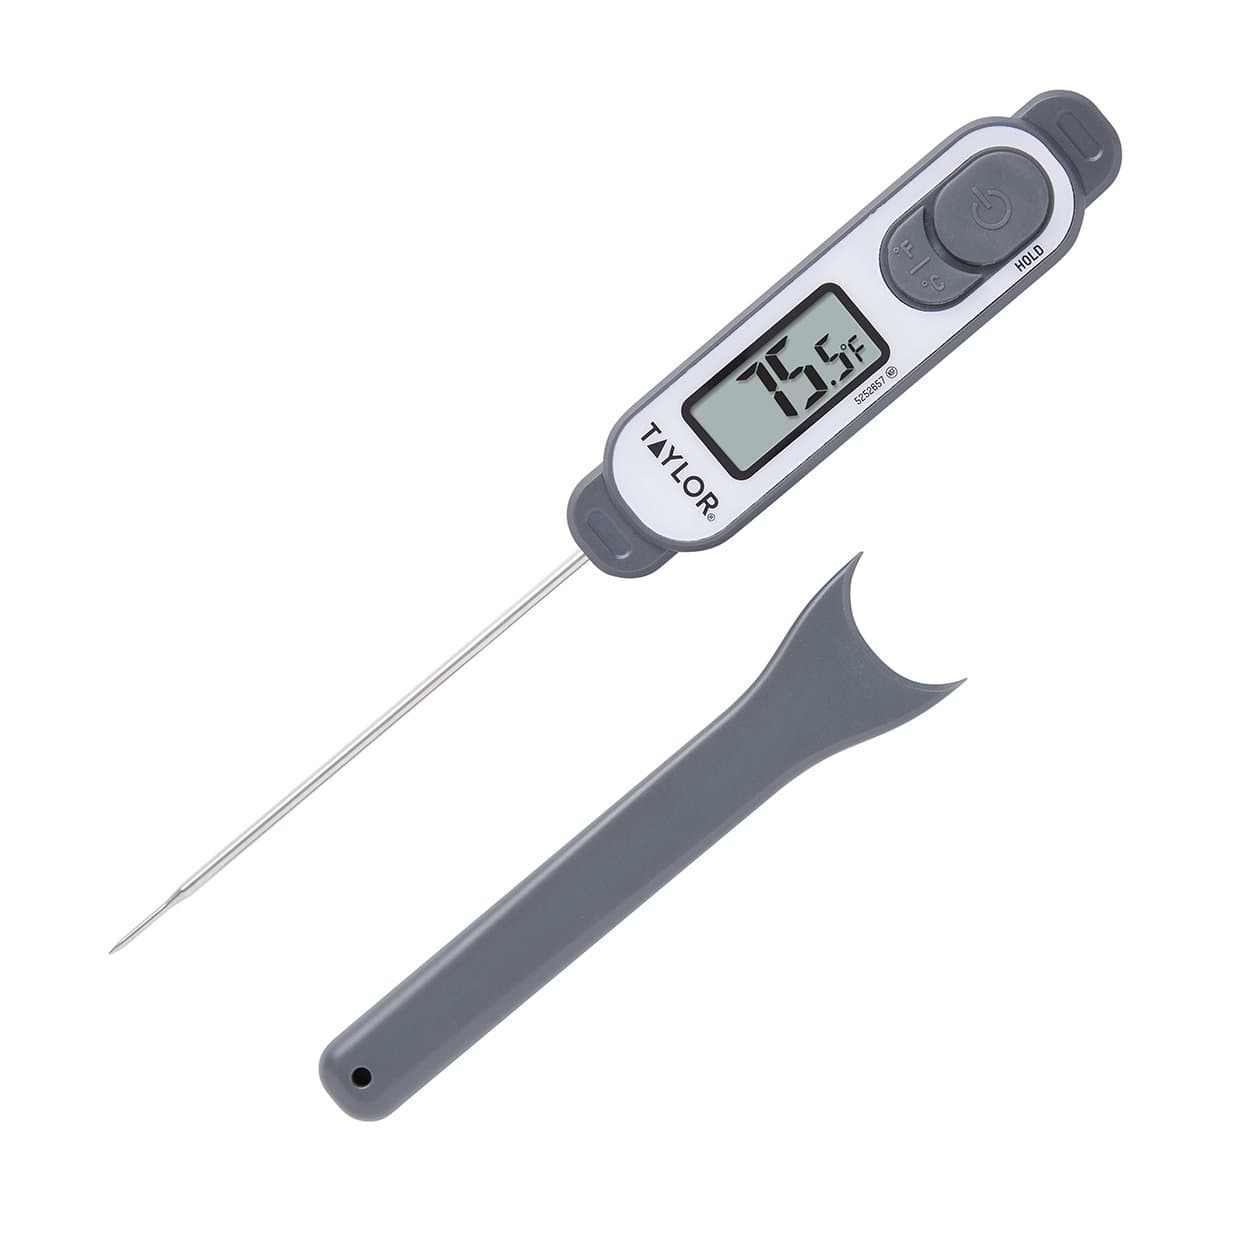 Taylor 5296652 Type-K Digital Folding Thermocouple Thermometer with  Replaceable Probe